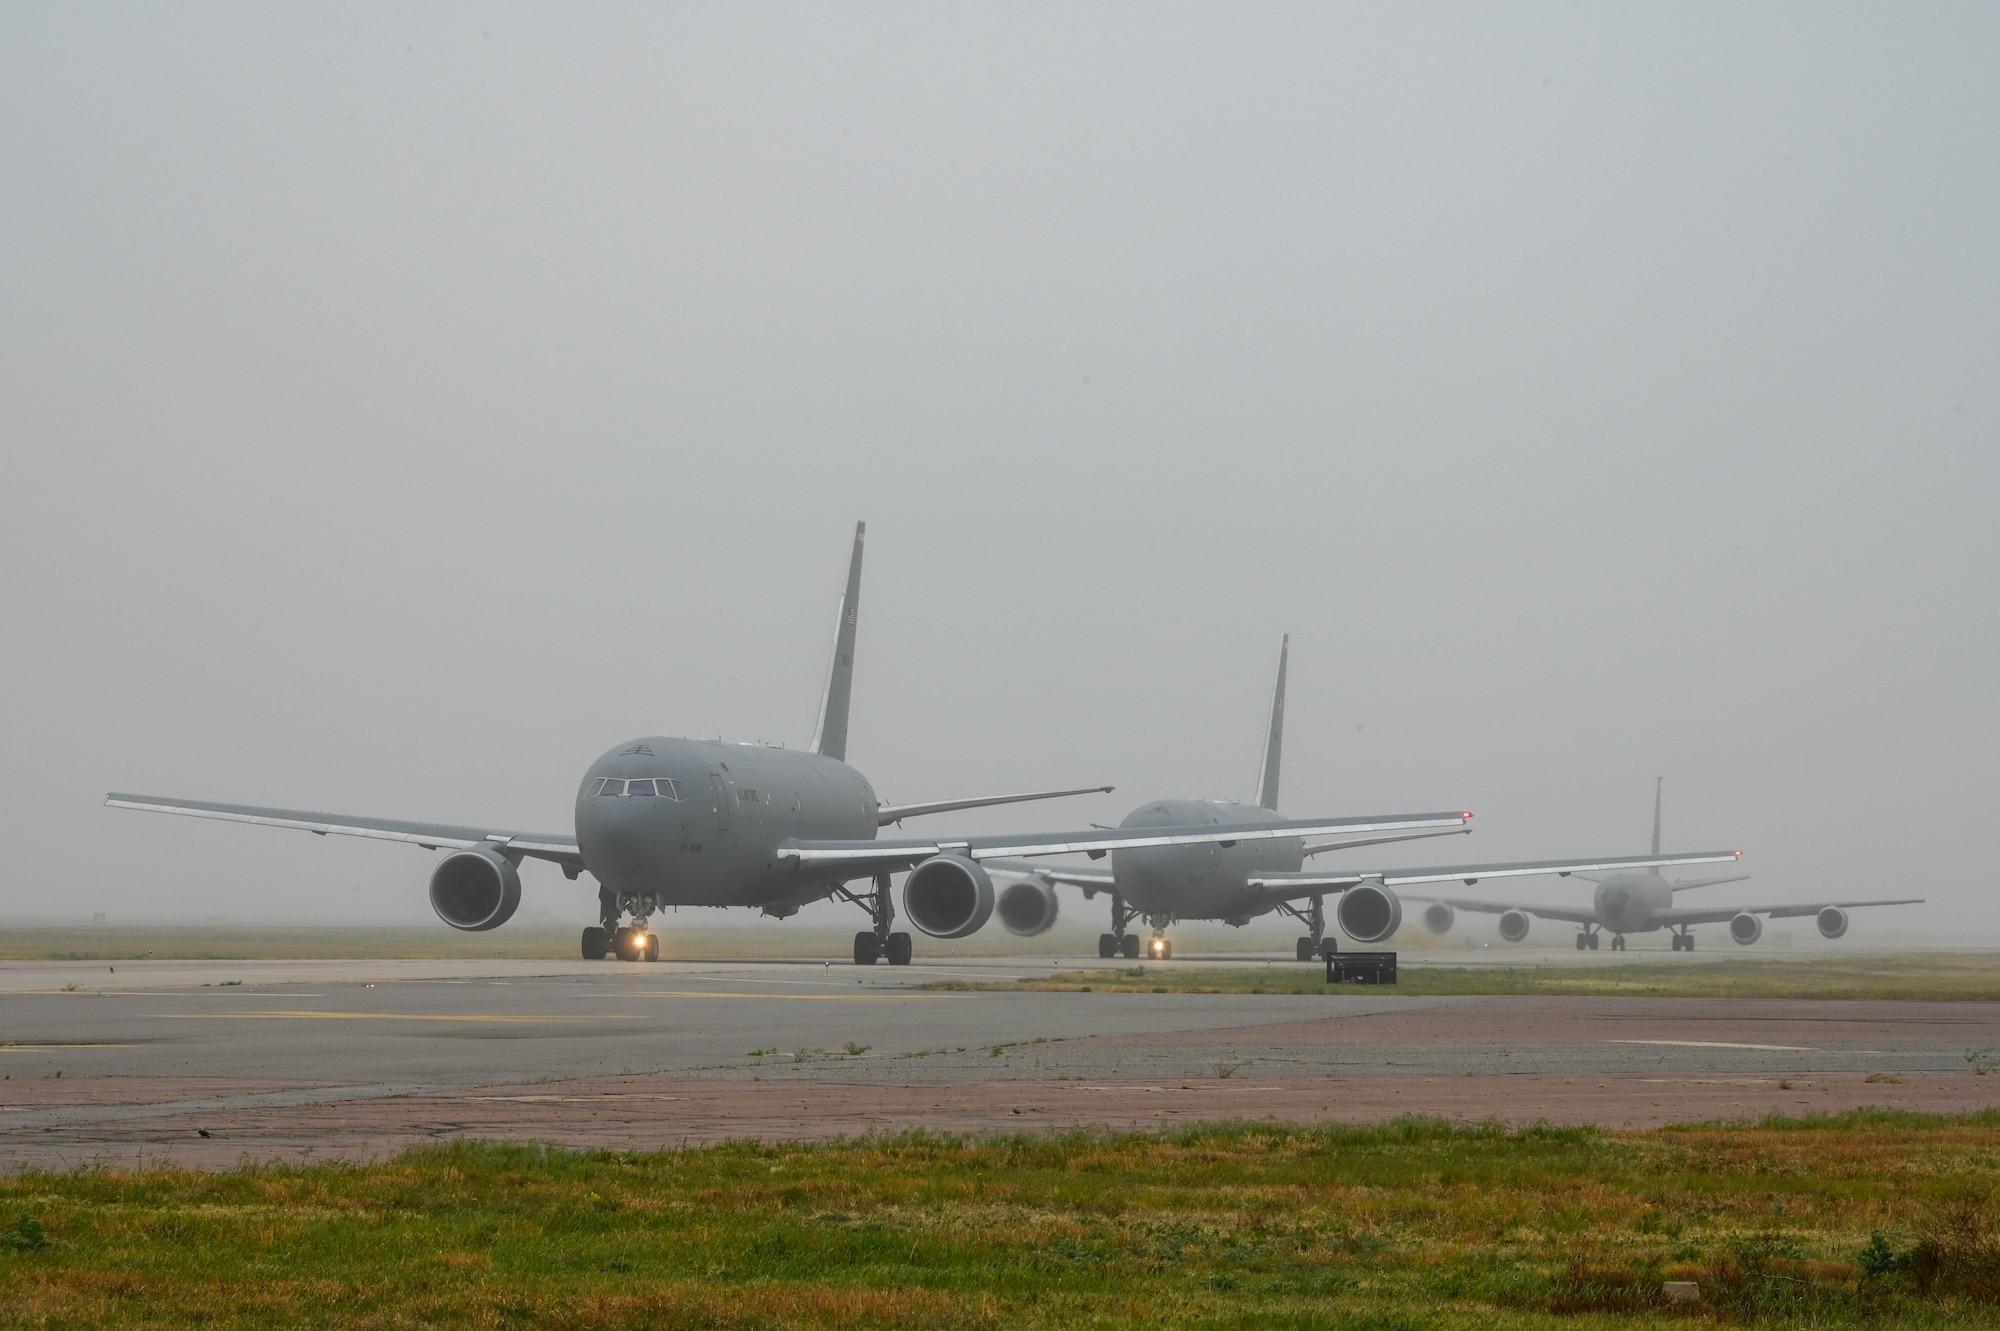 Two KC-46 Pegasus tankers and a KC-135 Stratotanker taxi on the runway due to incoming severe weather at Altus Air Force Base (AAFB), Oklahoma, May 4, 2022. 33 total aircraft launched from AAFB: 25 in a three-hour period on May 4, while 8 others took off the previous evening. (U.S. Air Force photo by Senior Airman Kayla Christenson)